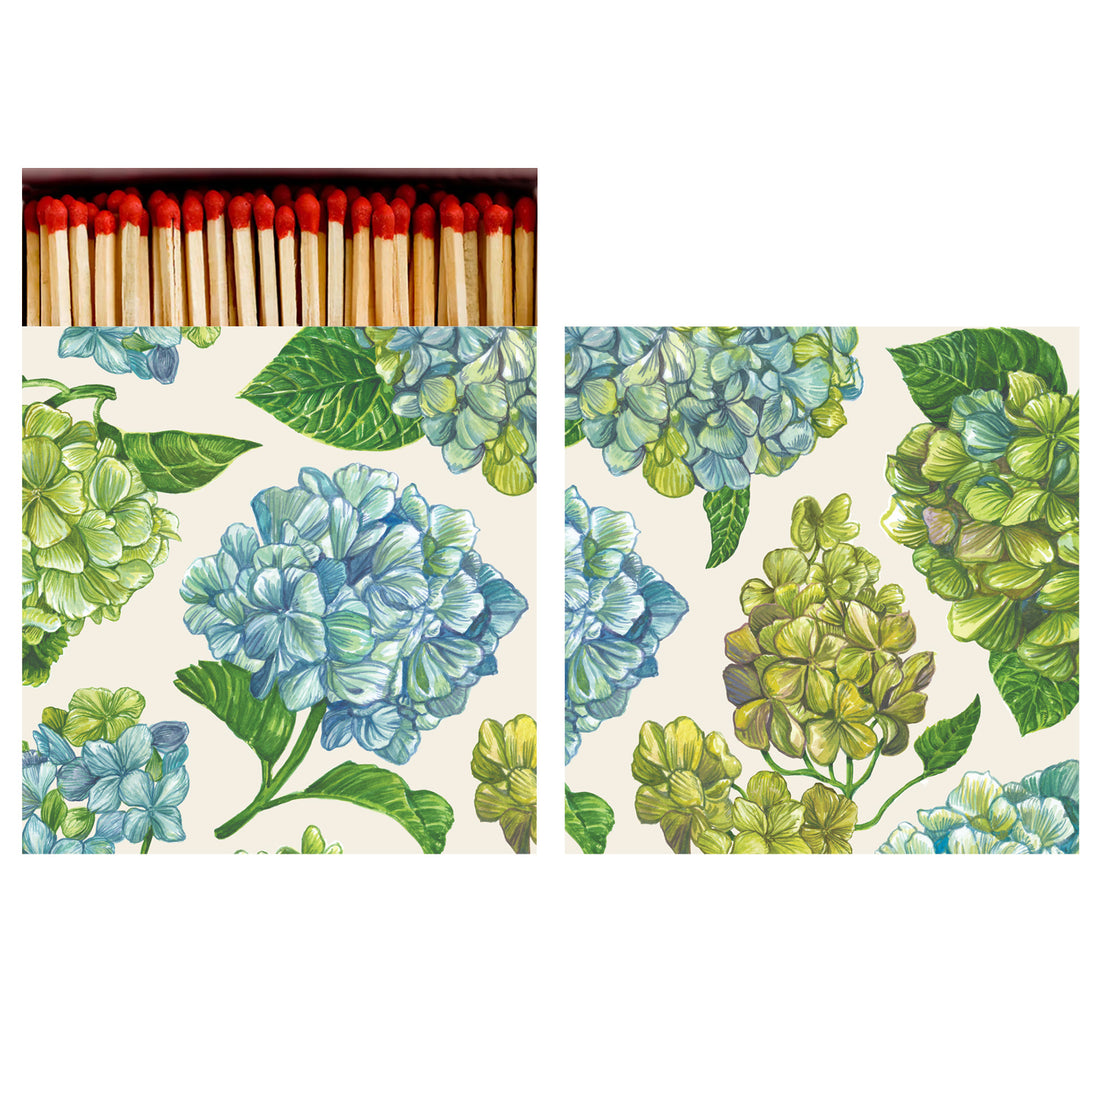 Two sides of a square match box, the left of which is open slightly to reveal the matches inside. The artwork on the box depicts lovely blue and green hydrangea blooms with vibrant green leaves patterned over a cream background.